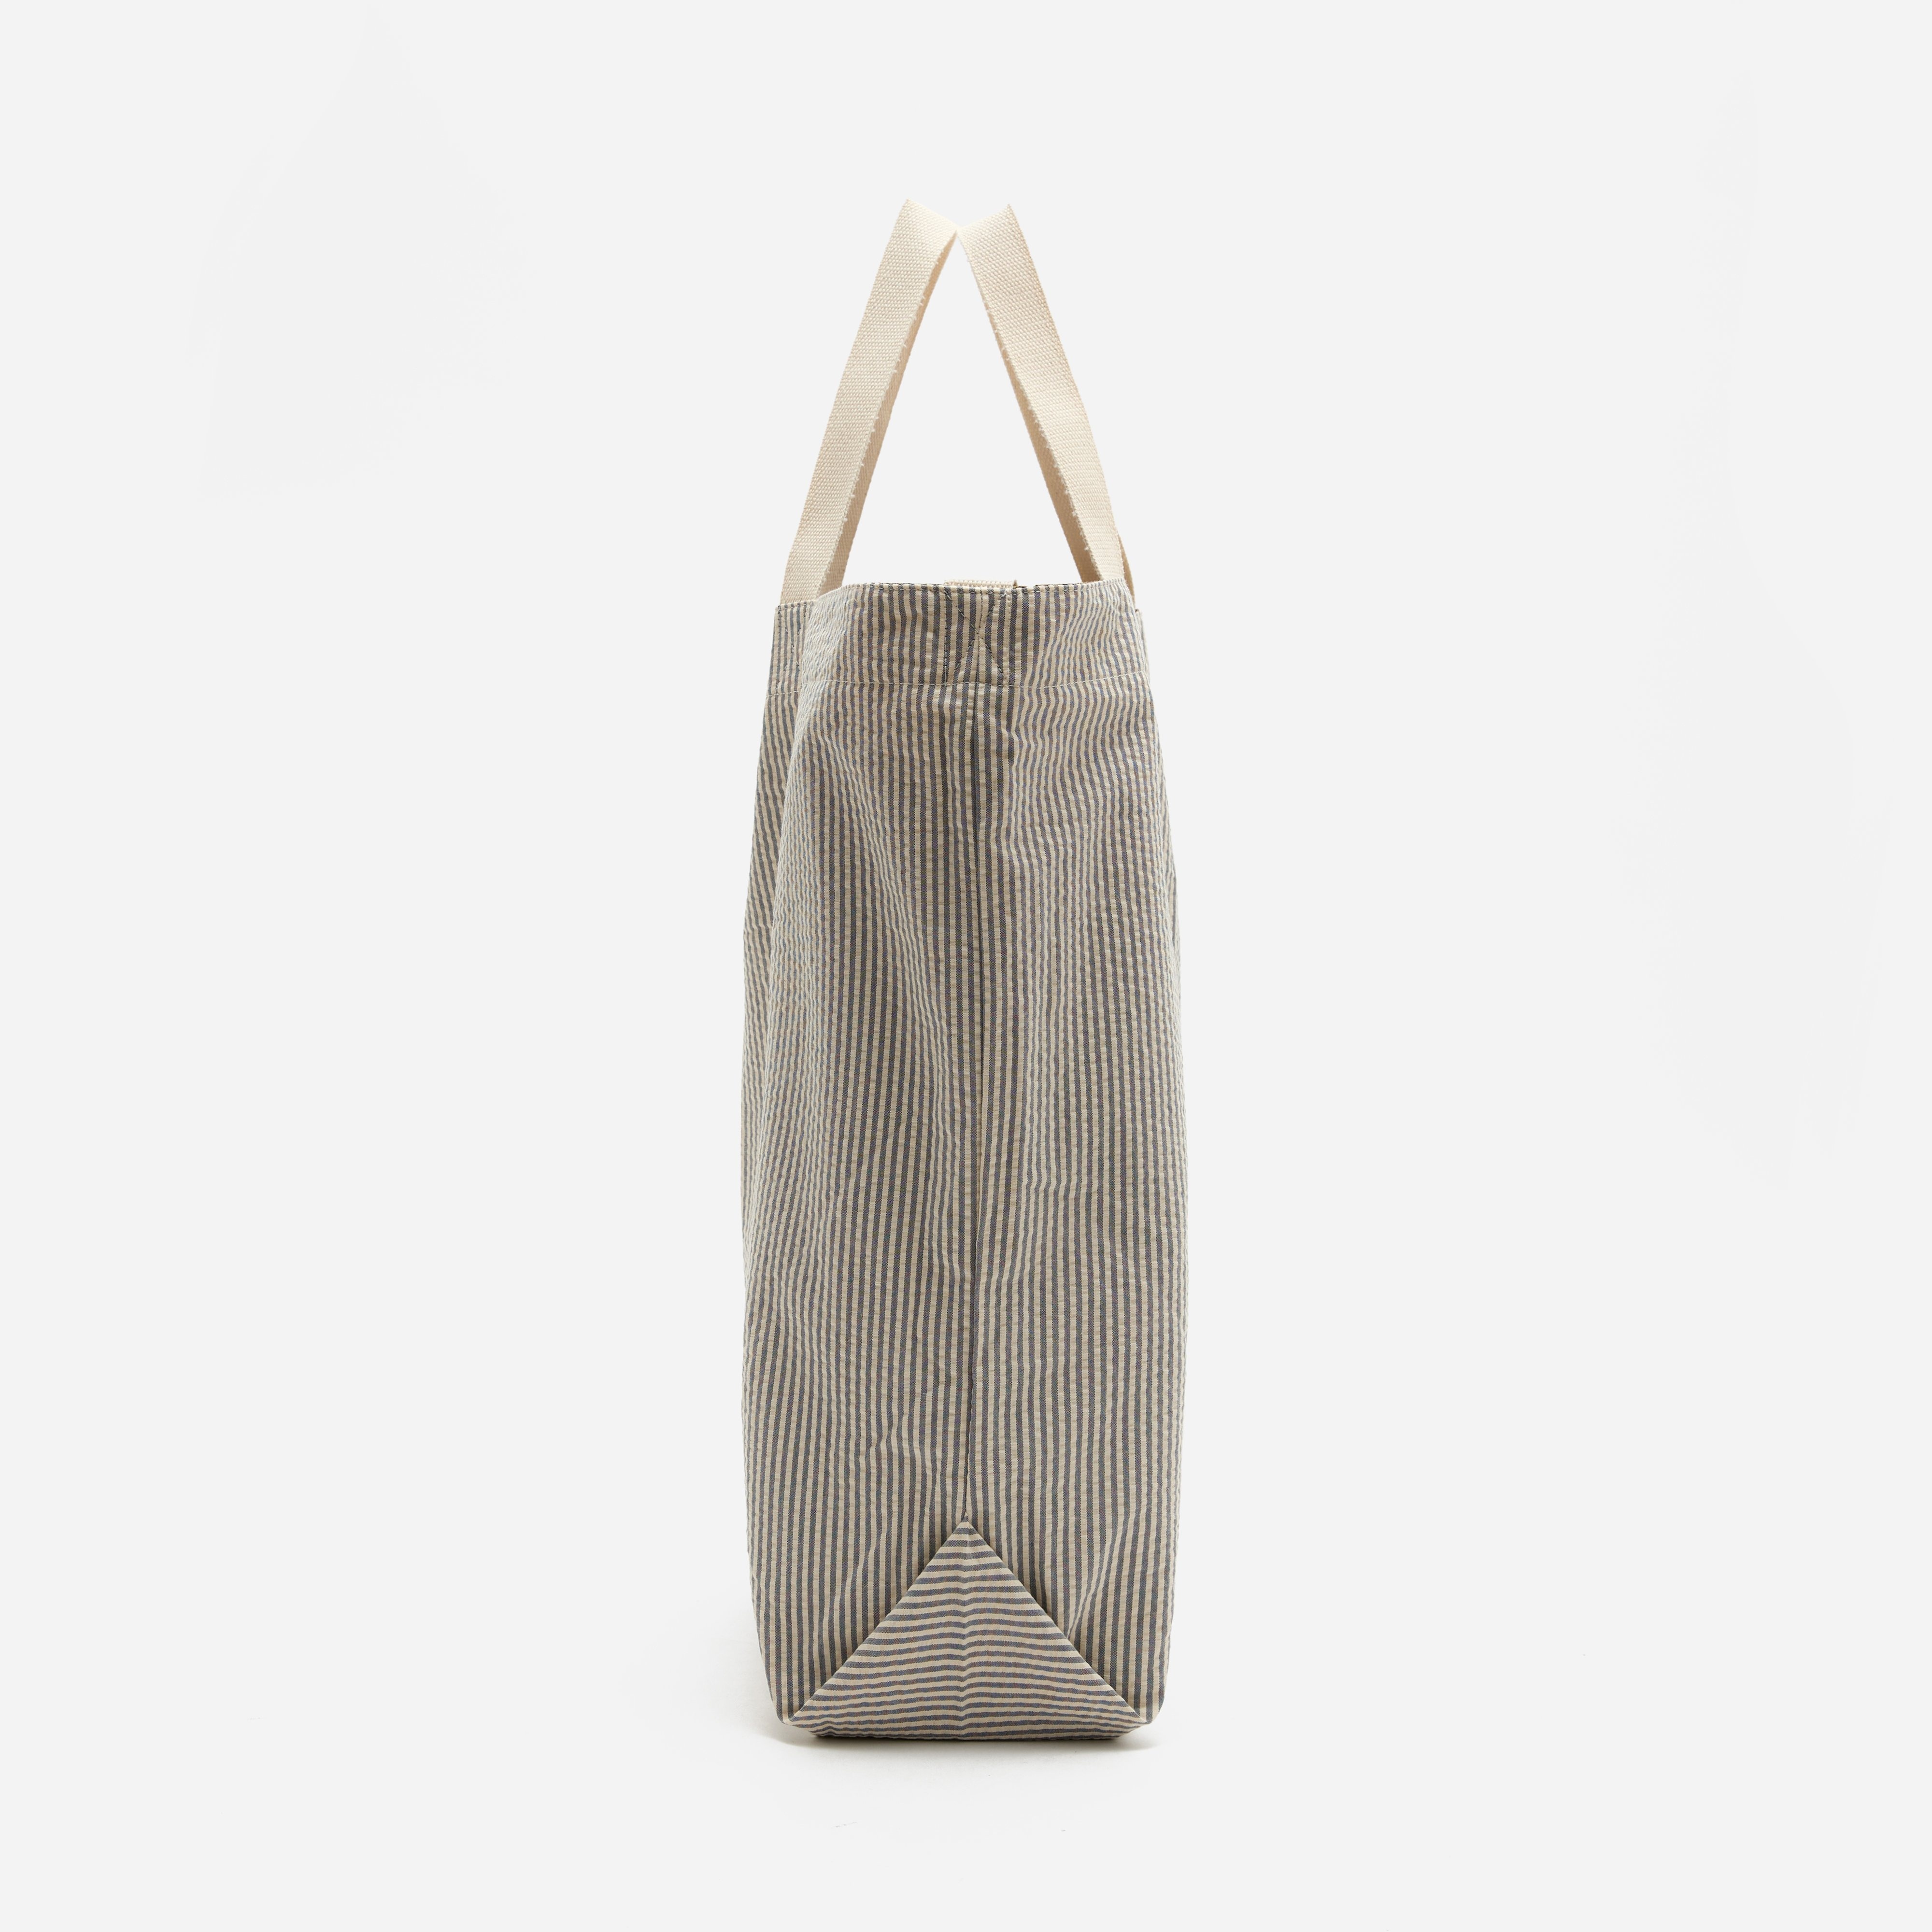 Engineered Garments CARRY ALL TOTE NAVY - 4